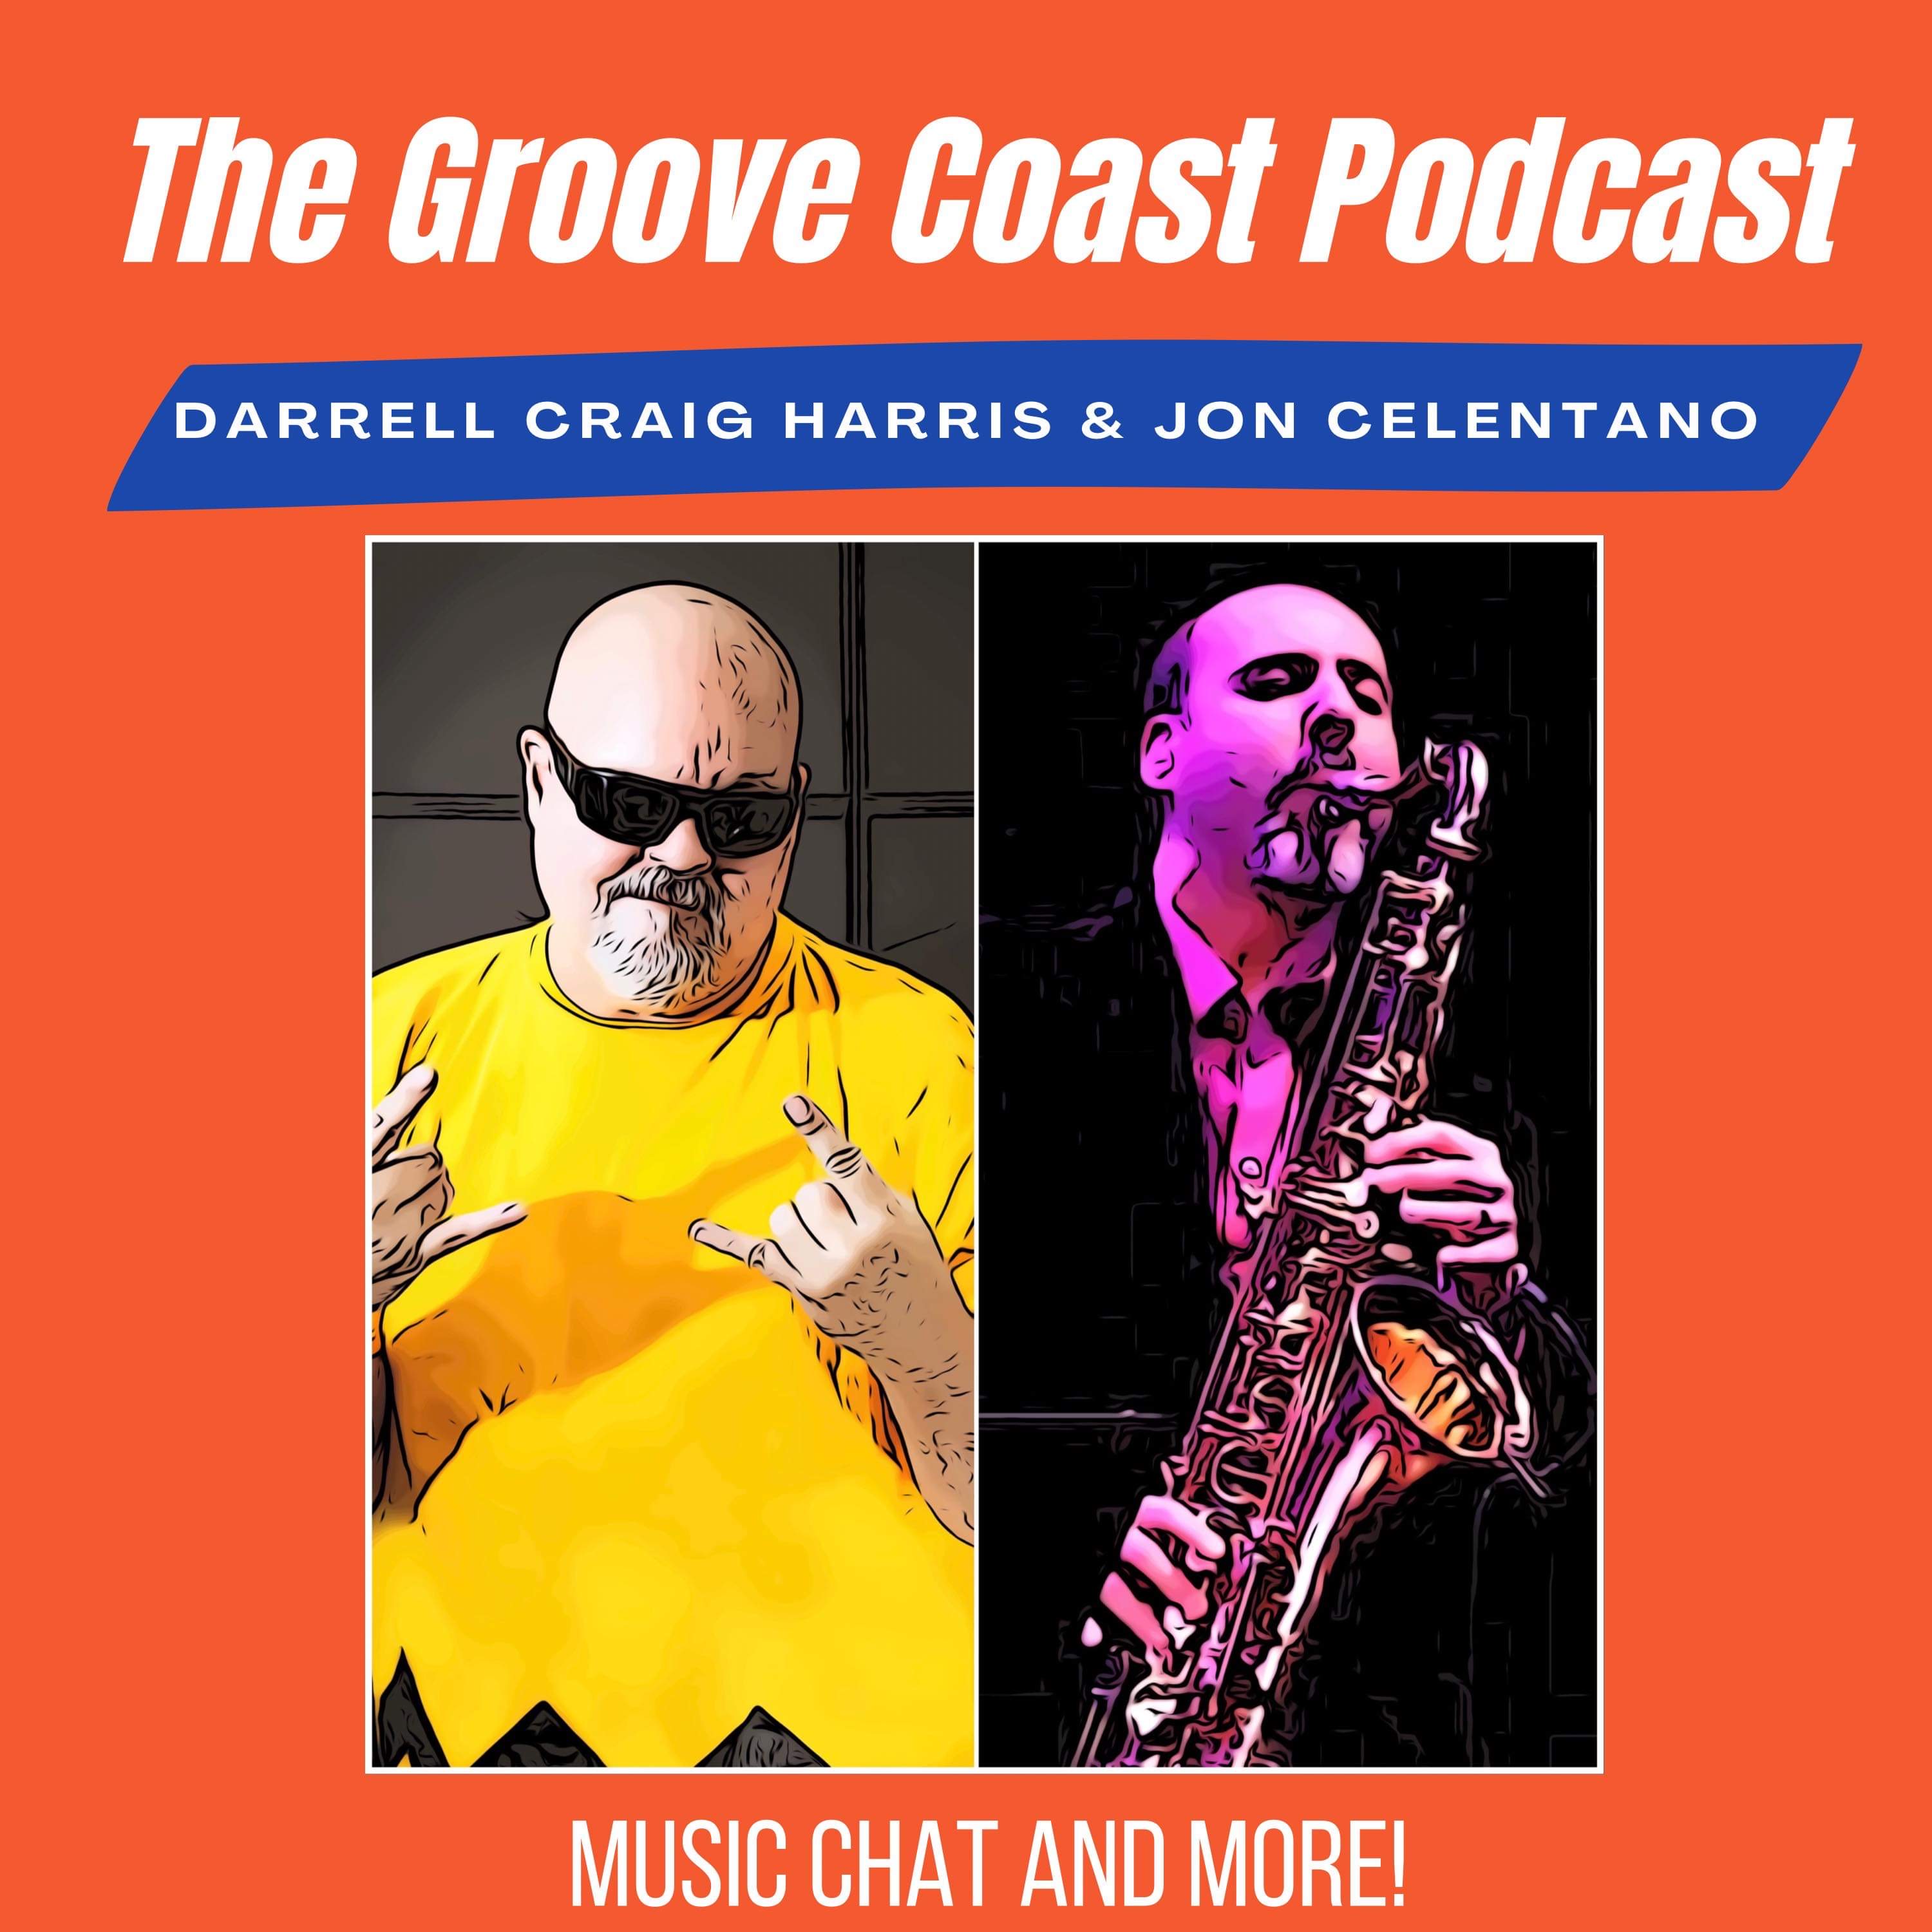 The Groove Coast Podcast